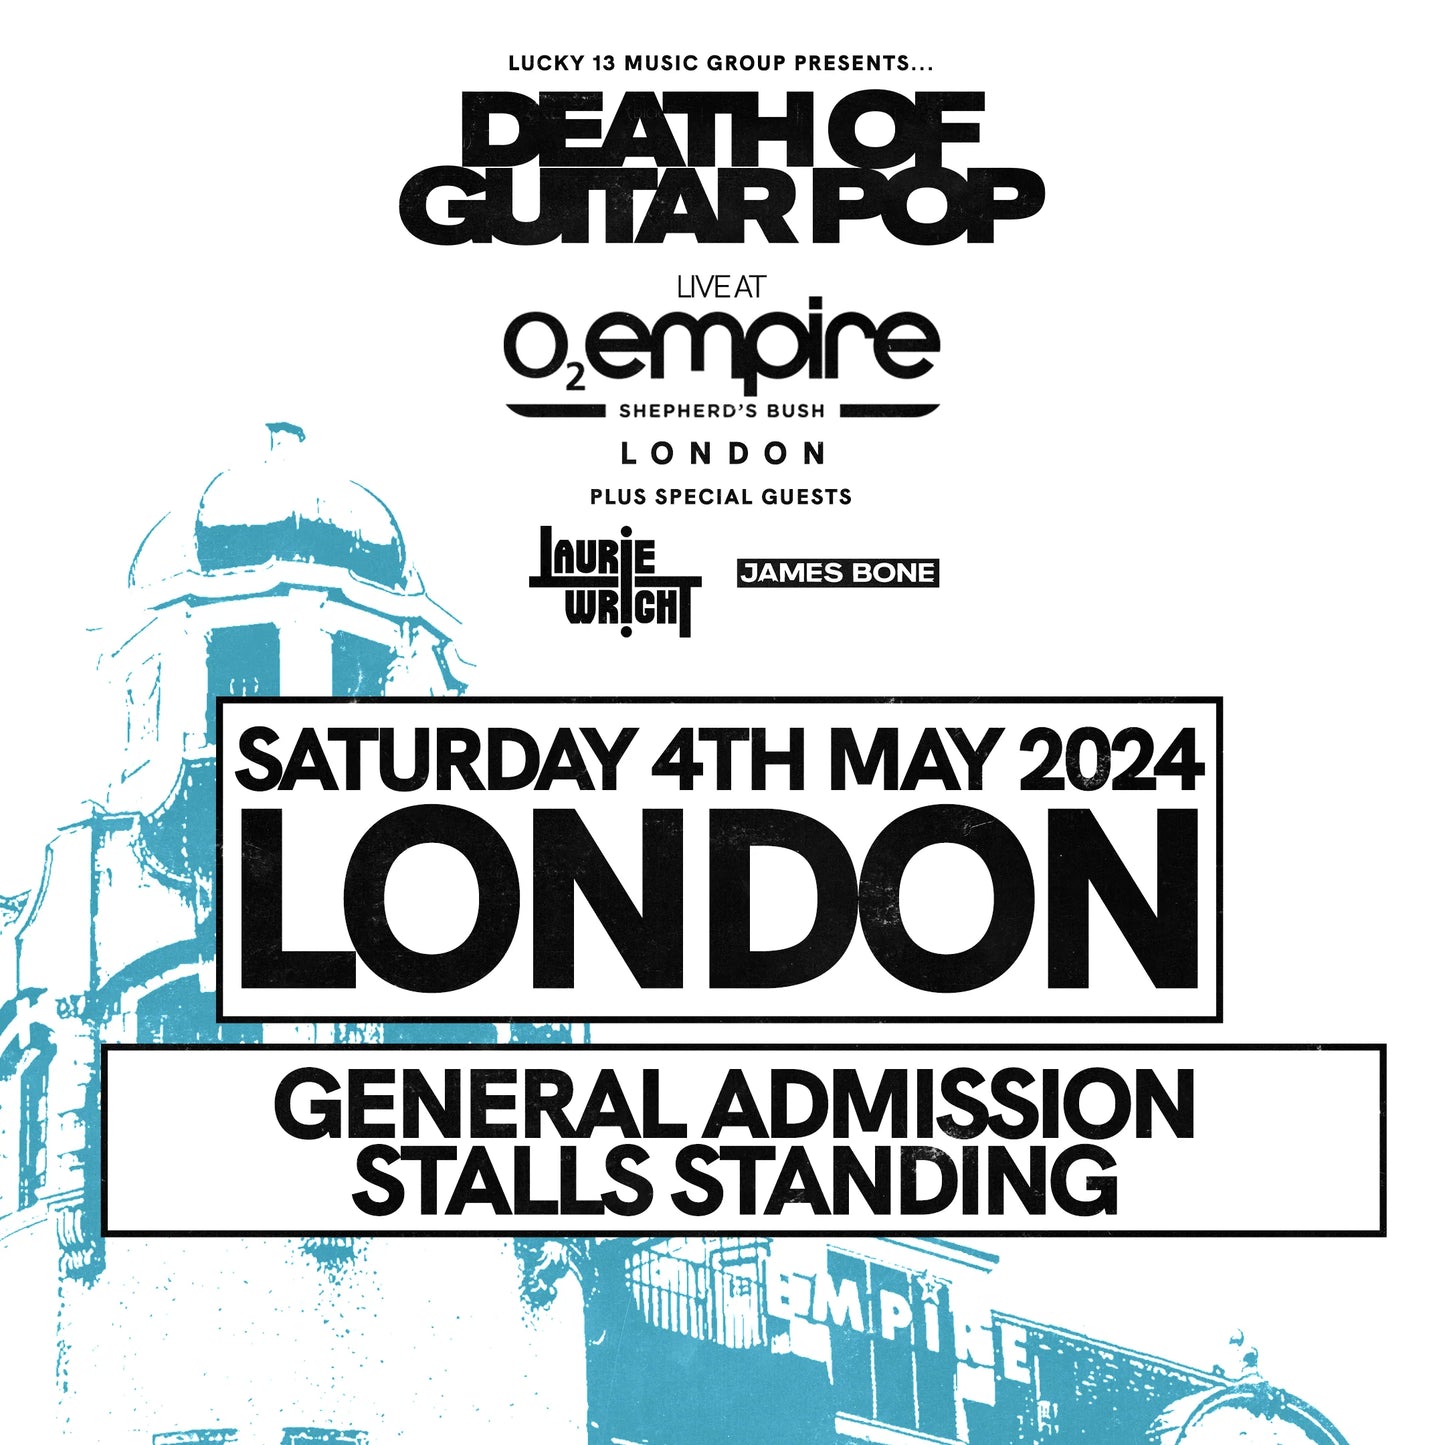 DEATH OF GUITAR POP LIVE AT O2 SHEPHERD'S BUSH EMPIRE LONDON - 2nd RELEASE (LAURIE WRIGHT)